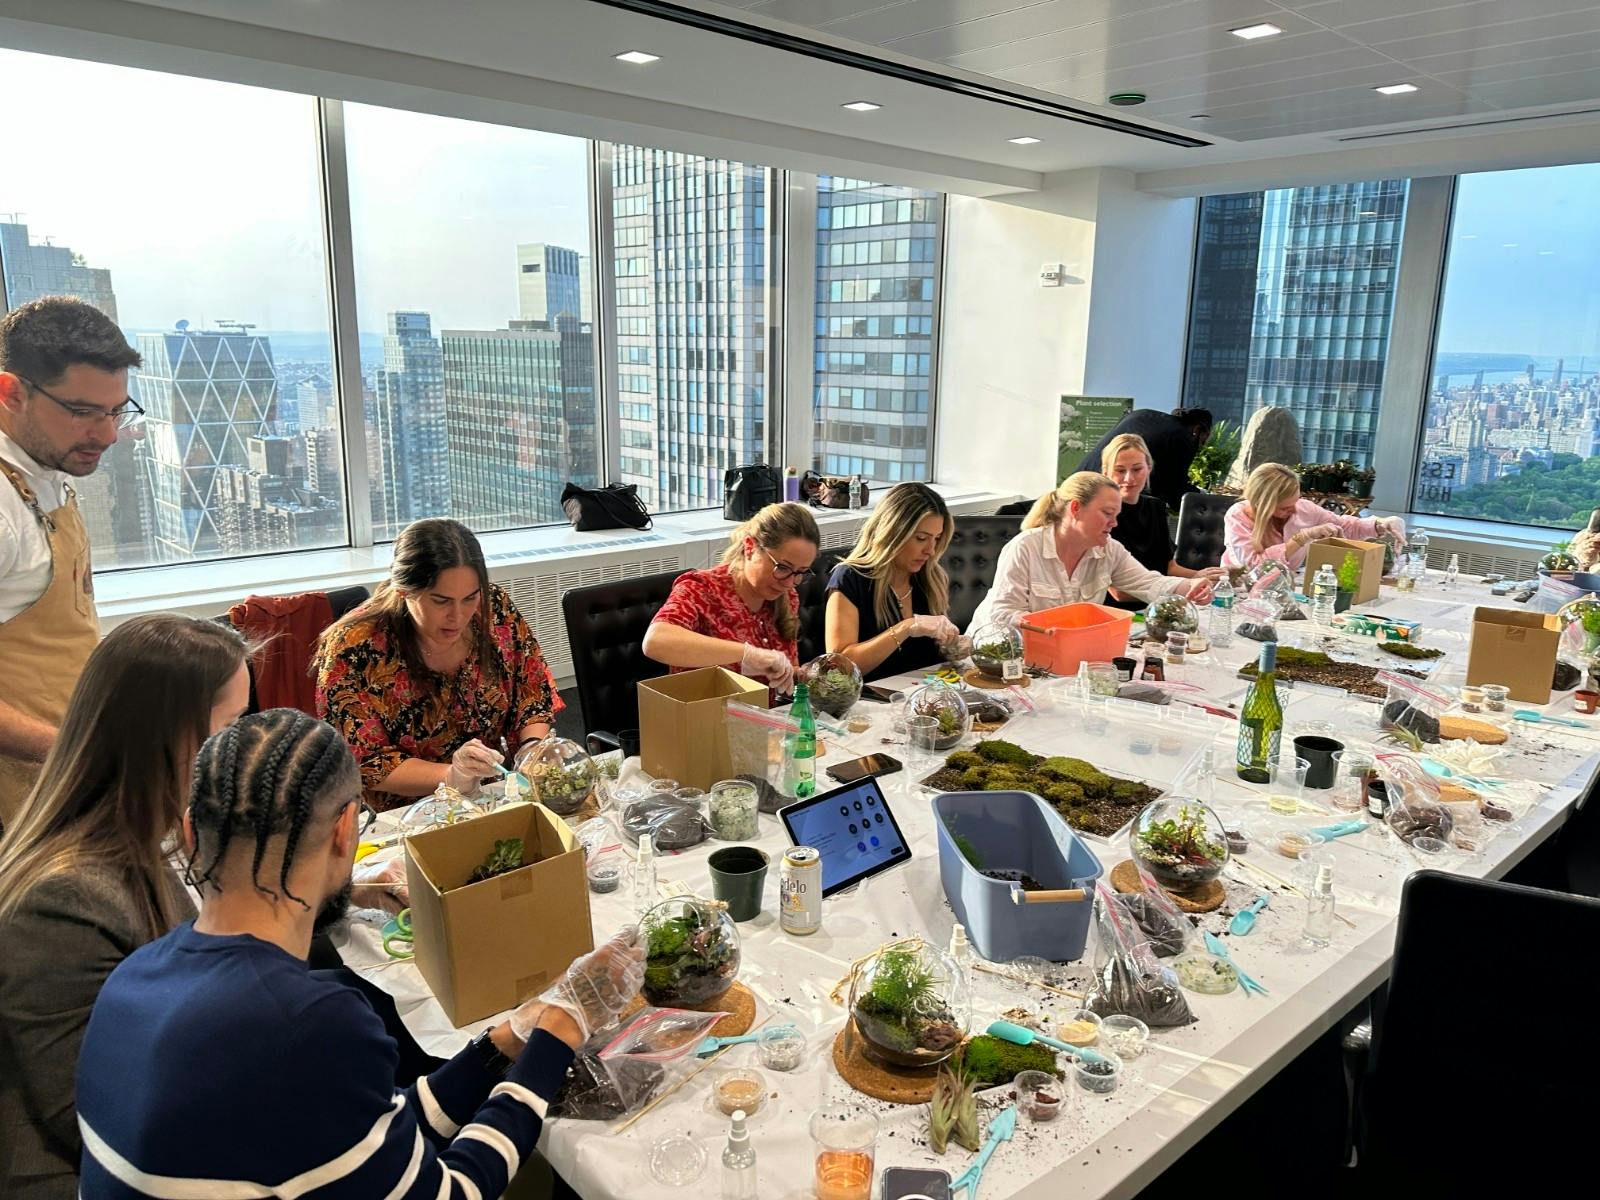 Group of people engaged in a terrarium-making workshop in a brightly lit office space